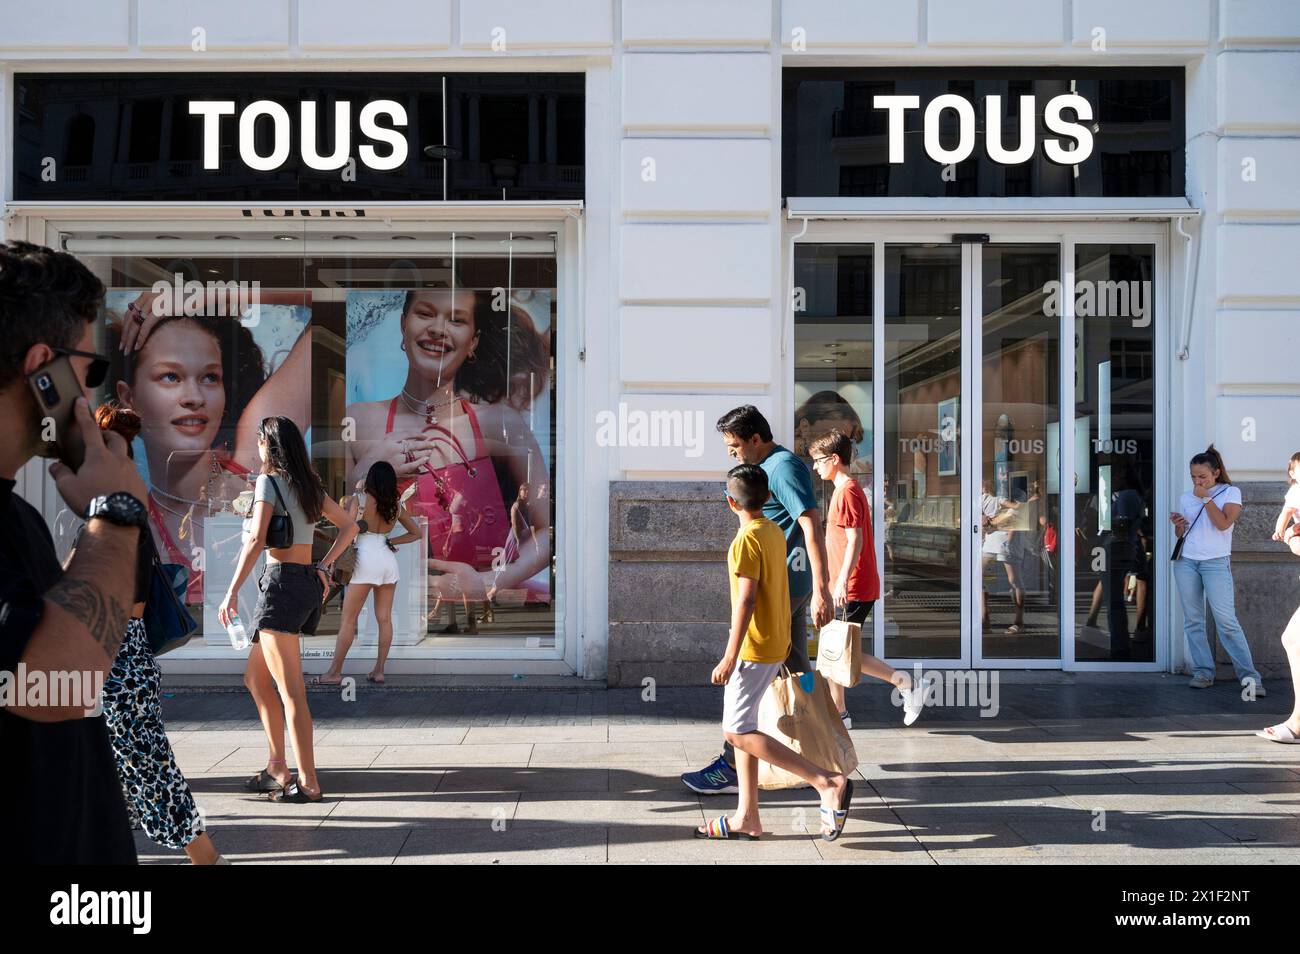 Pedestrians and shoppers walk past the Spanish jewelry, accessories, and fashion retailer Tous store in Spain. Stock Photo